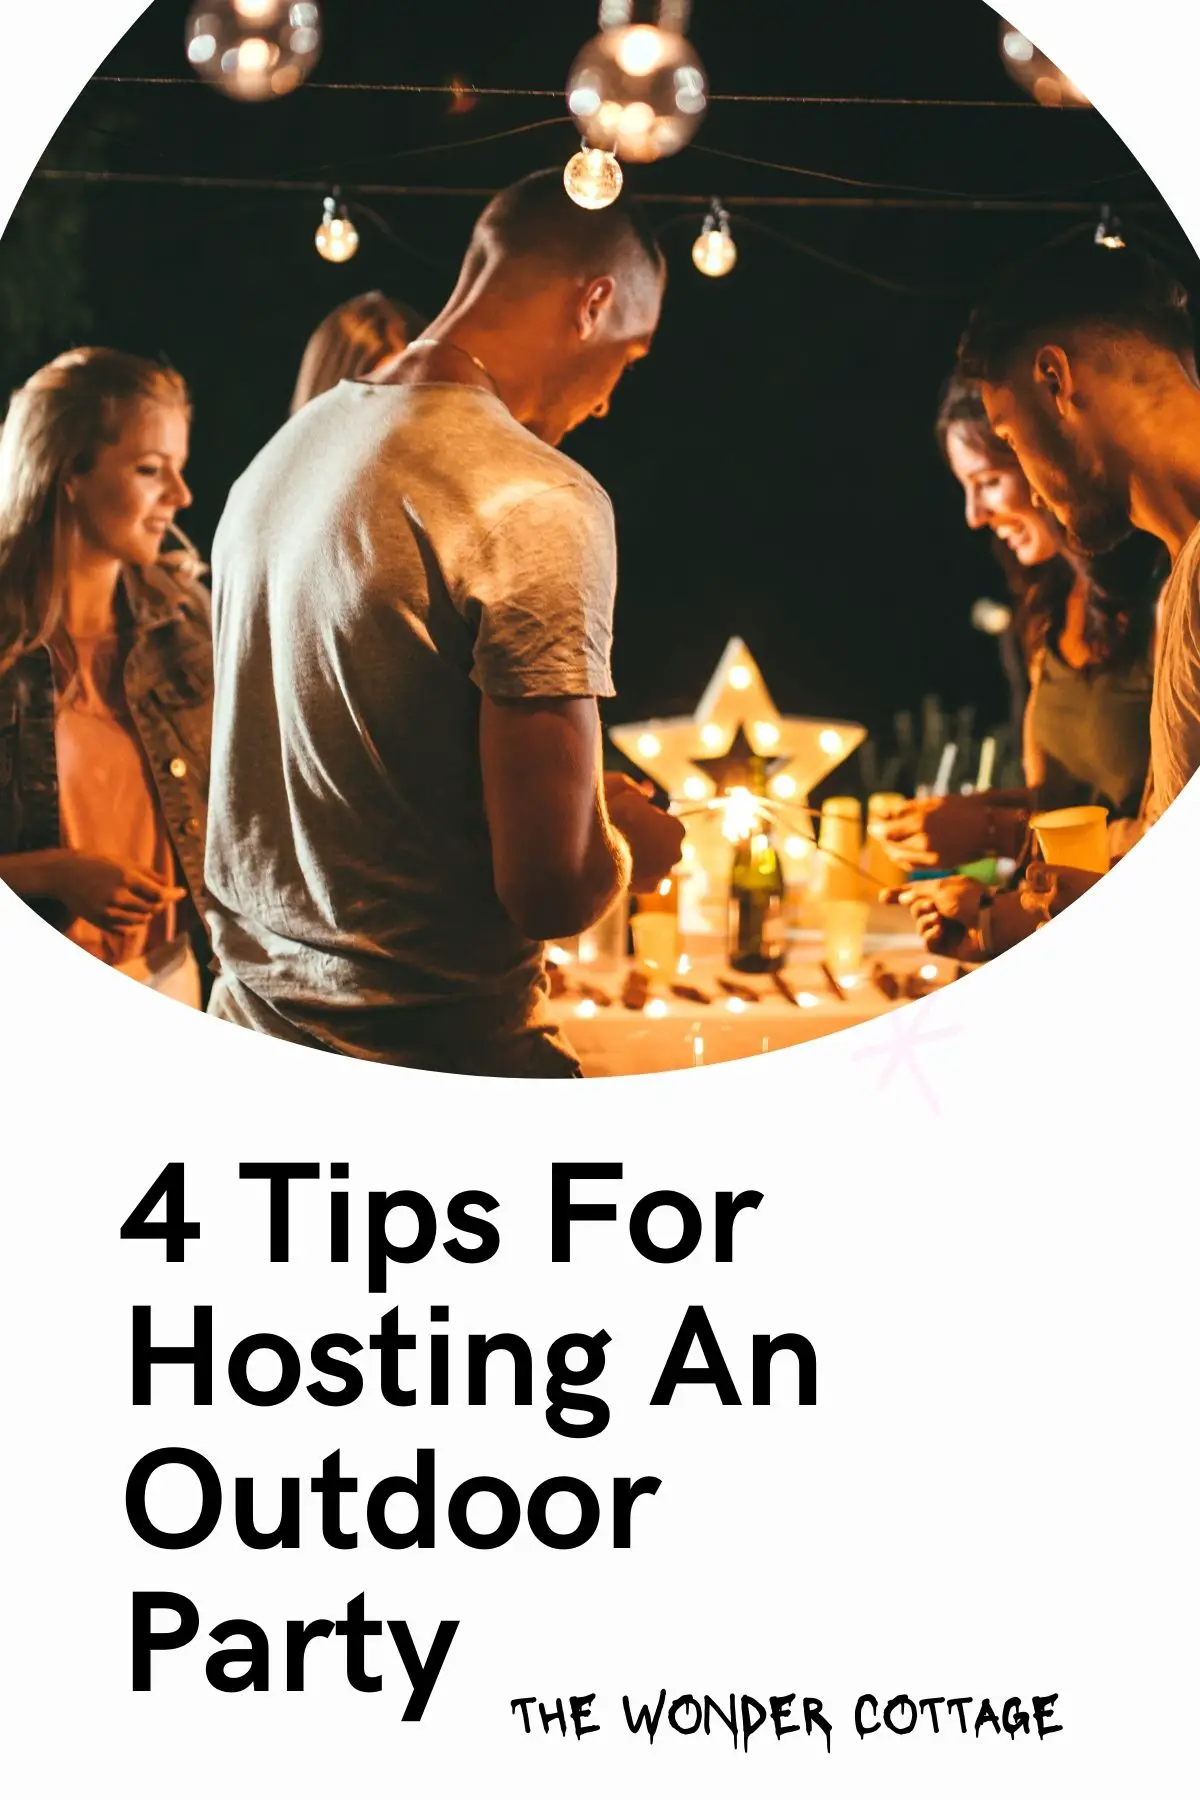 4 tips for hosting an outdoor party